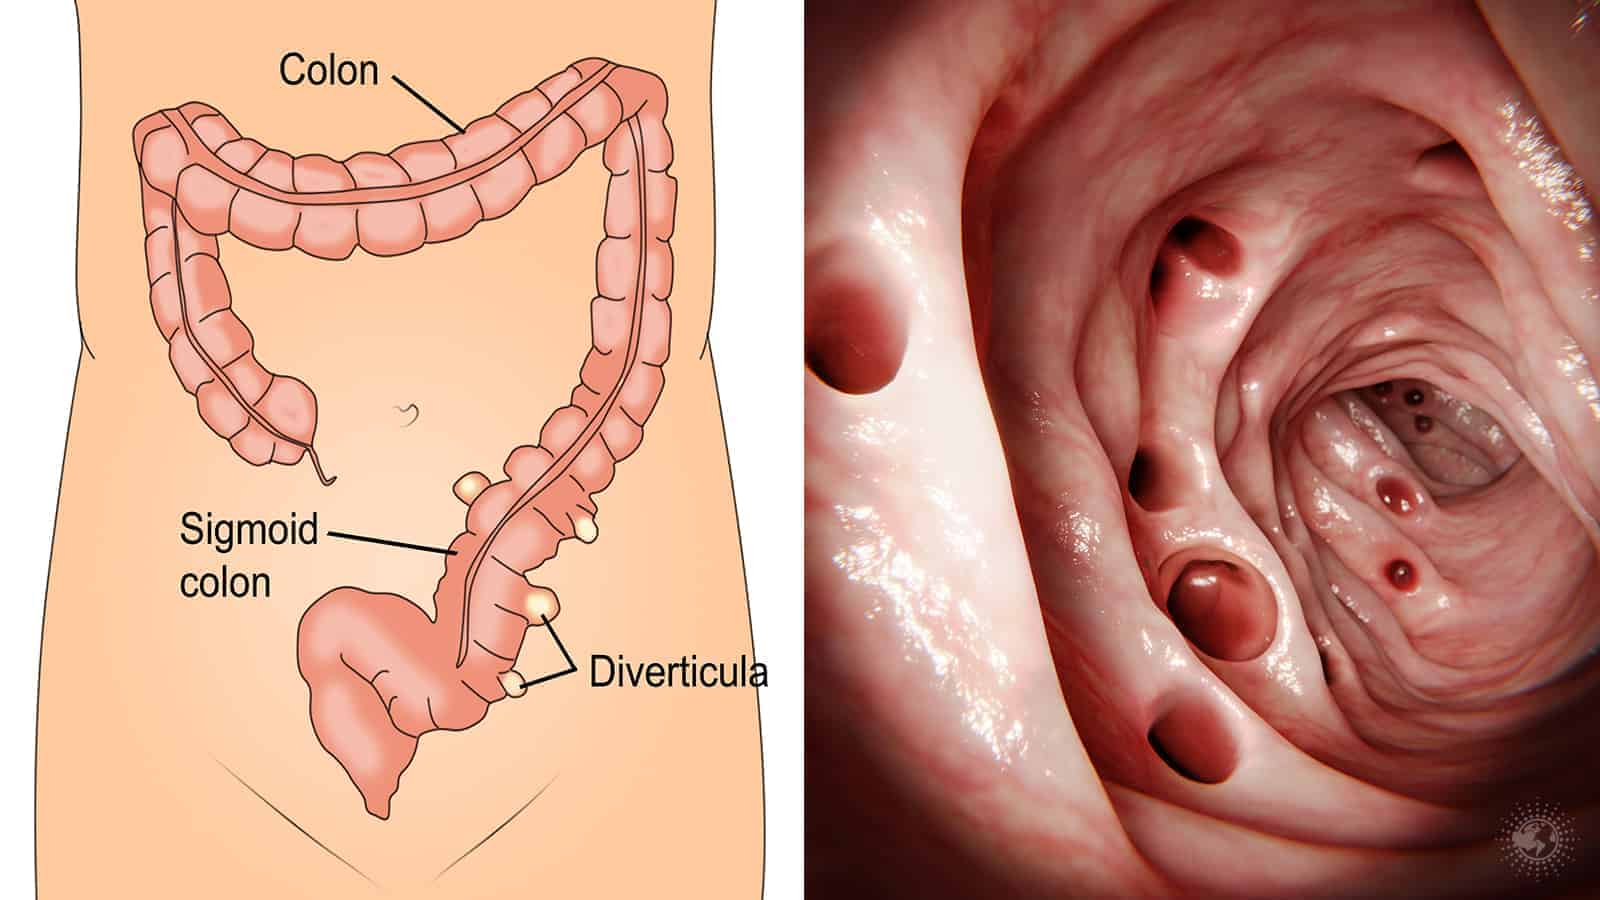 What Treatment Options Are Available For Diverticulitis?